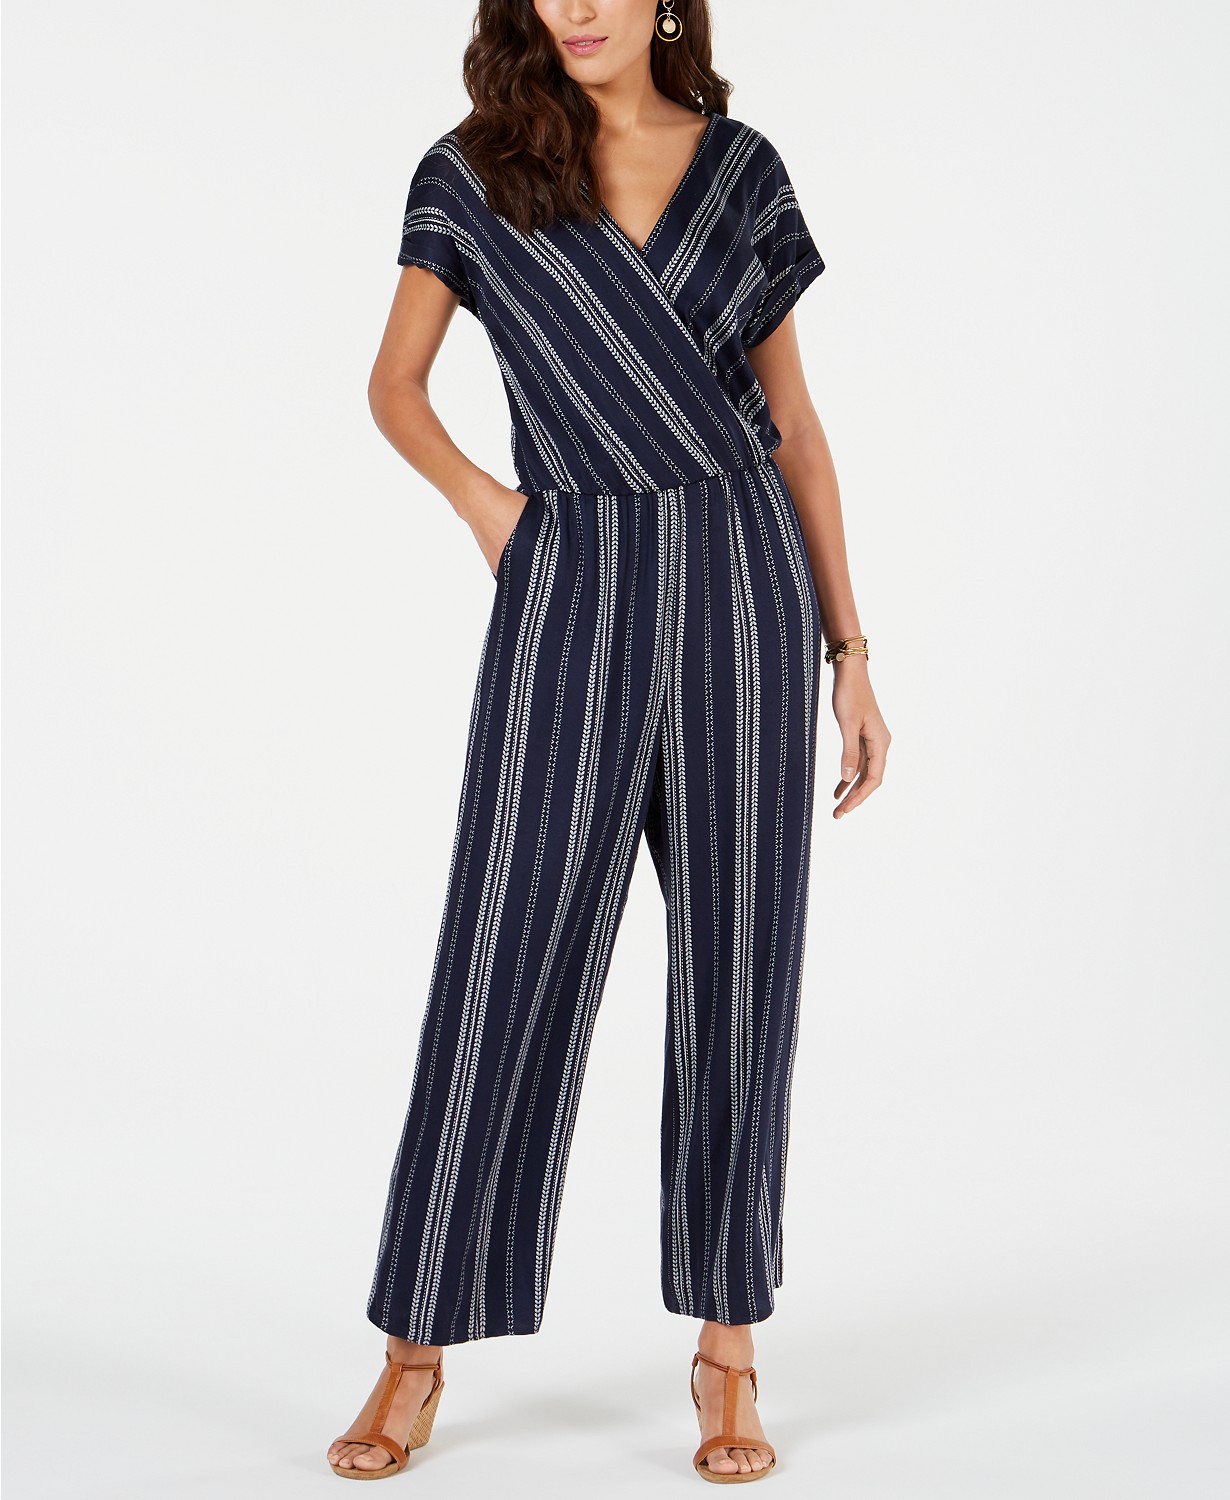 Pick Up the Formal Jumpsuits for Women – Corset Style